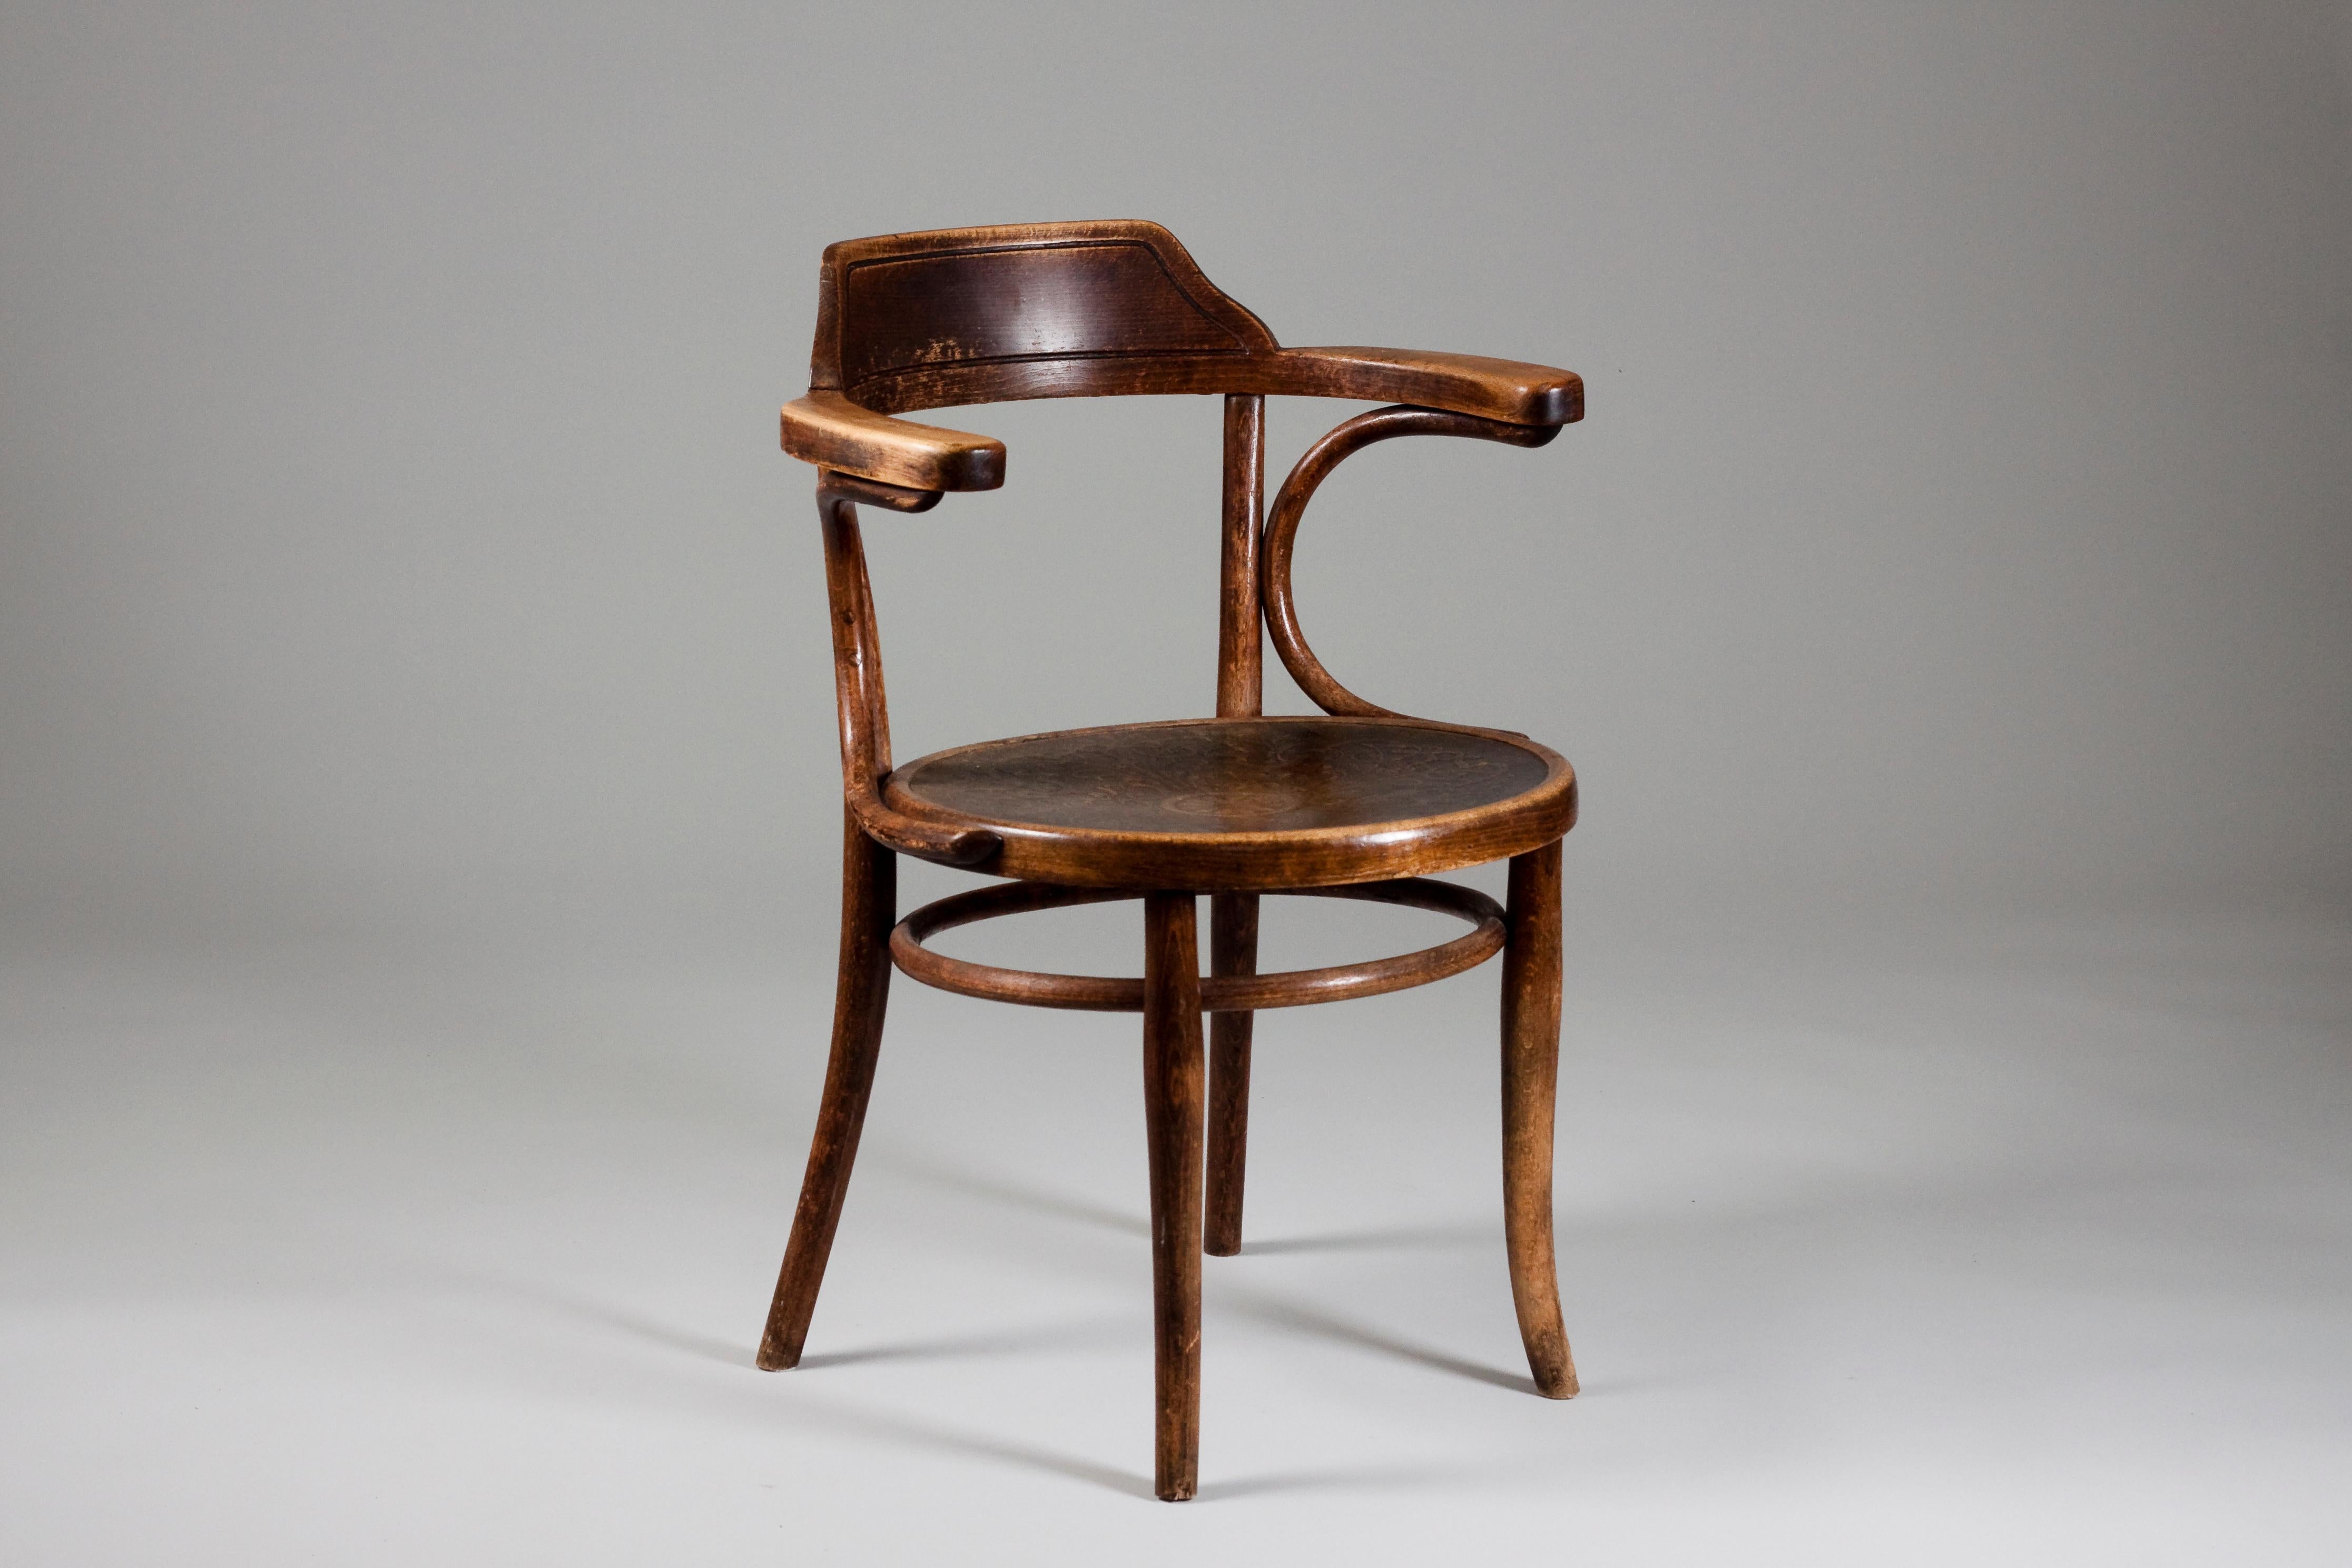 Beautifully patinated early 20th century rare Thonet bentwood armchair with a decorative form pressed seat.